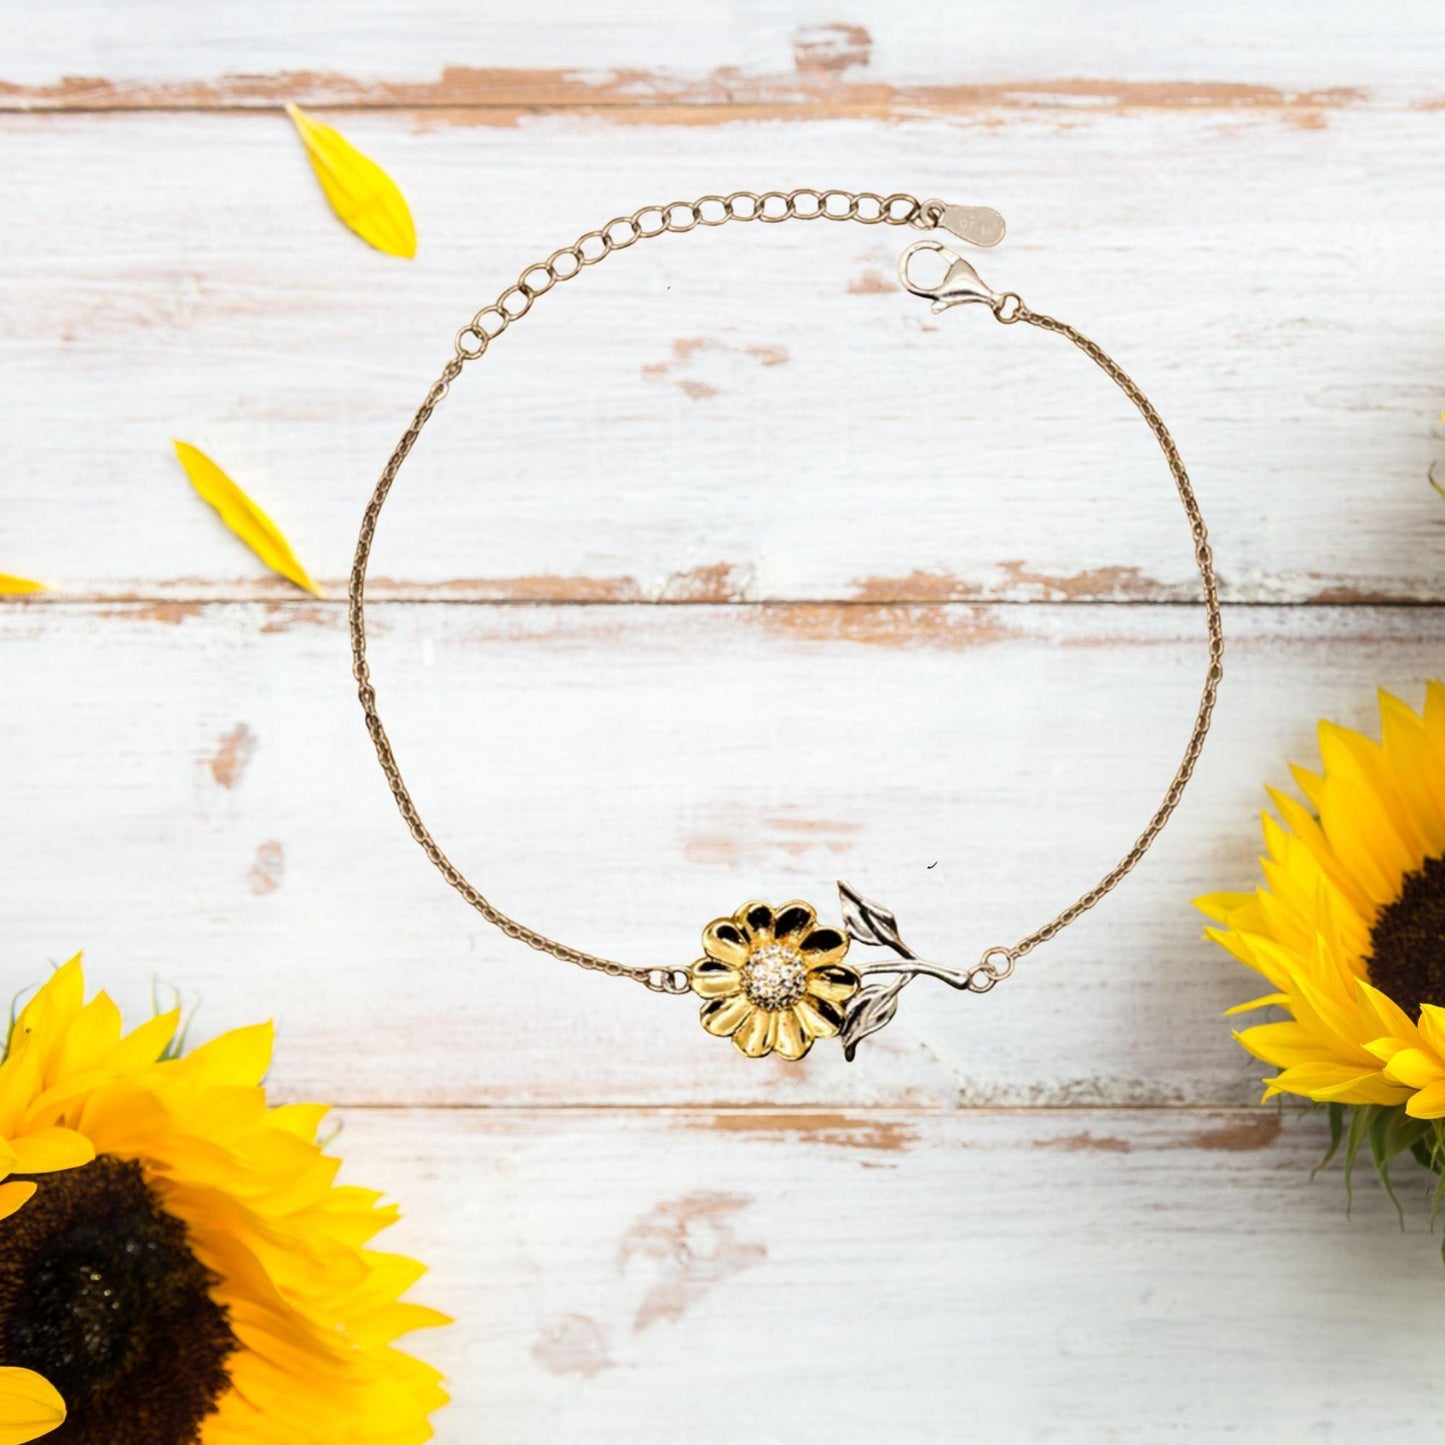 Colorado is my home Gifts, Lovely Colorado Birthday Christmas Sunflower Bracelet For People from Colorado, Men, Women, Friends - Mallard Moon Gift Shop